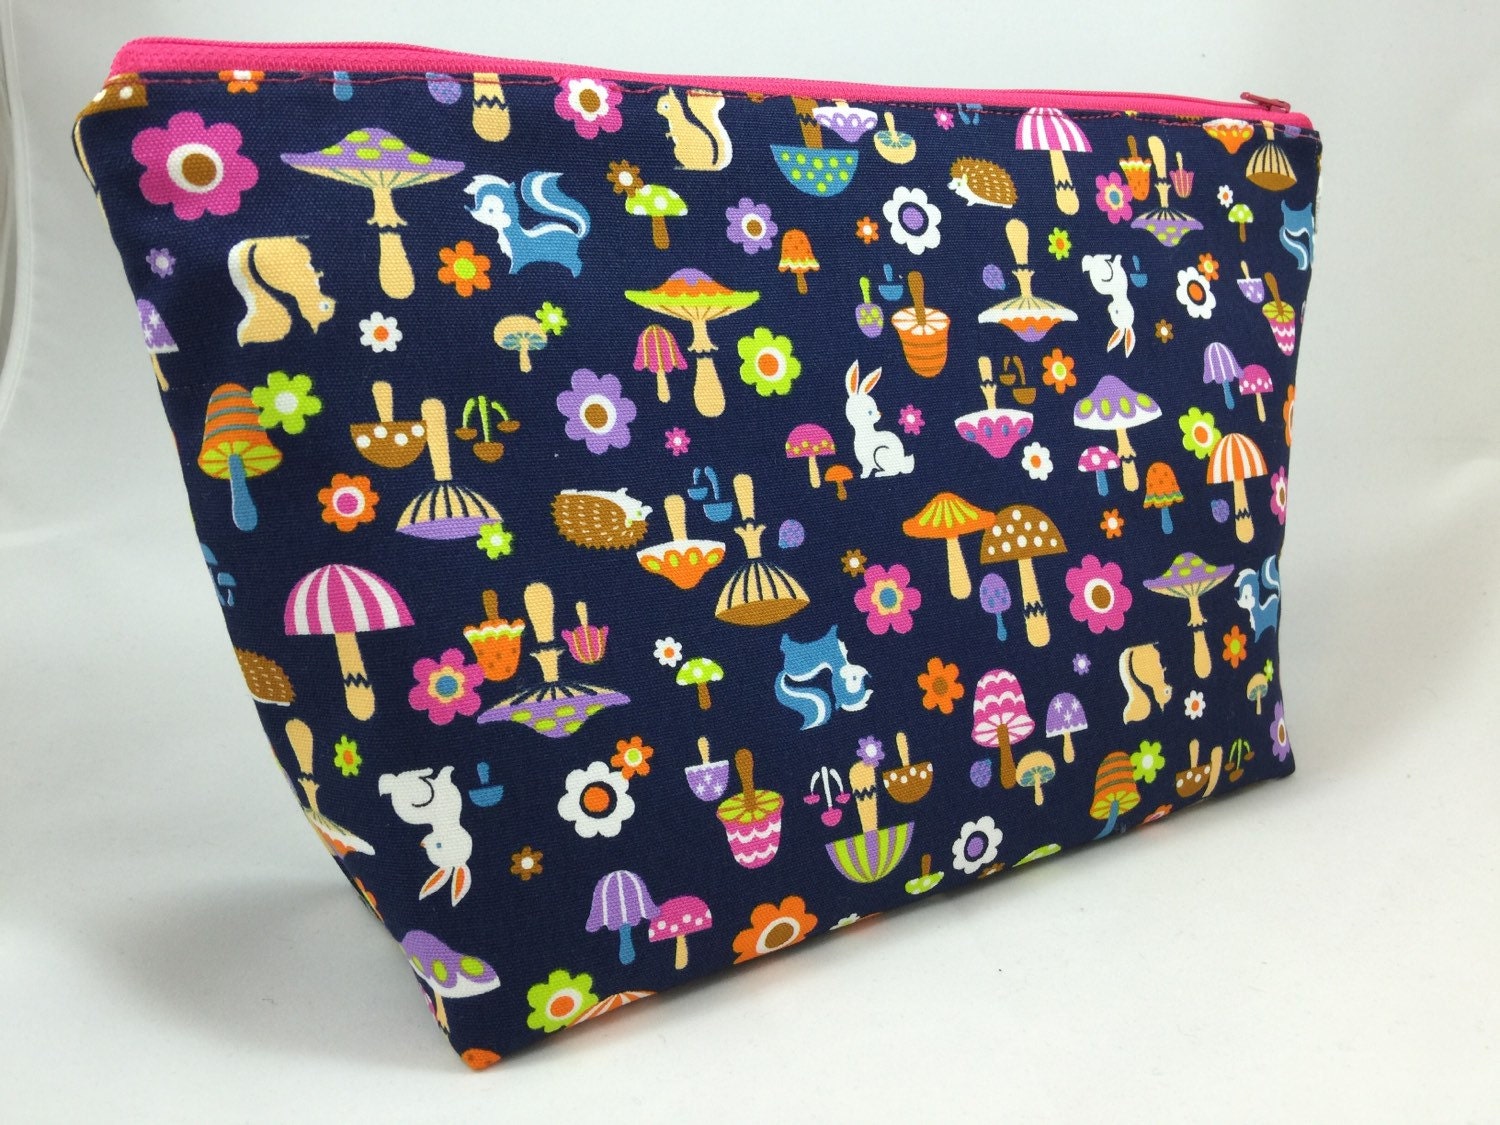 Extra Large Cosmetic Bag Toiletry Bag Travel Bag by NeedleandOak